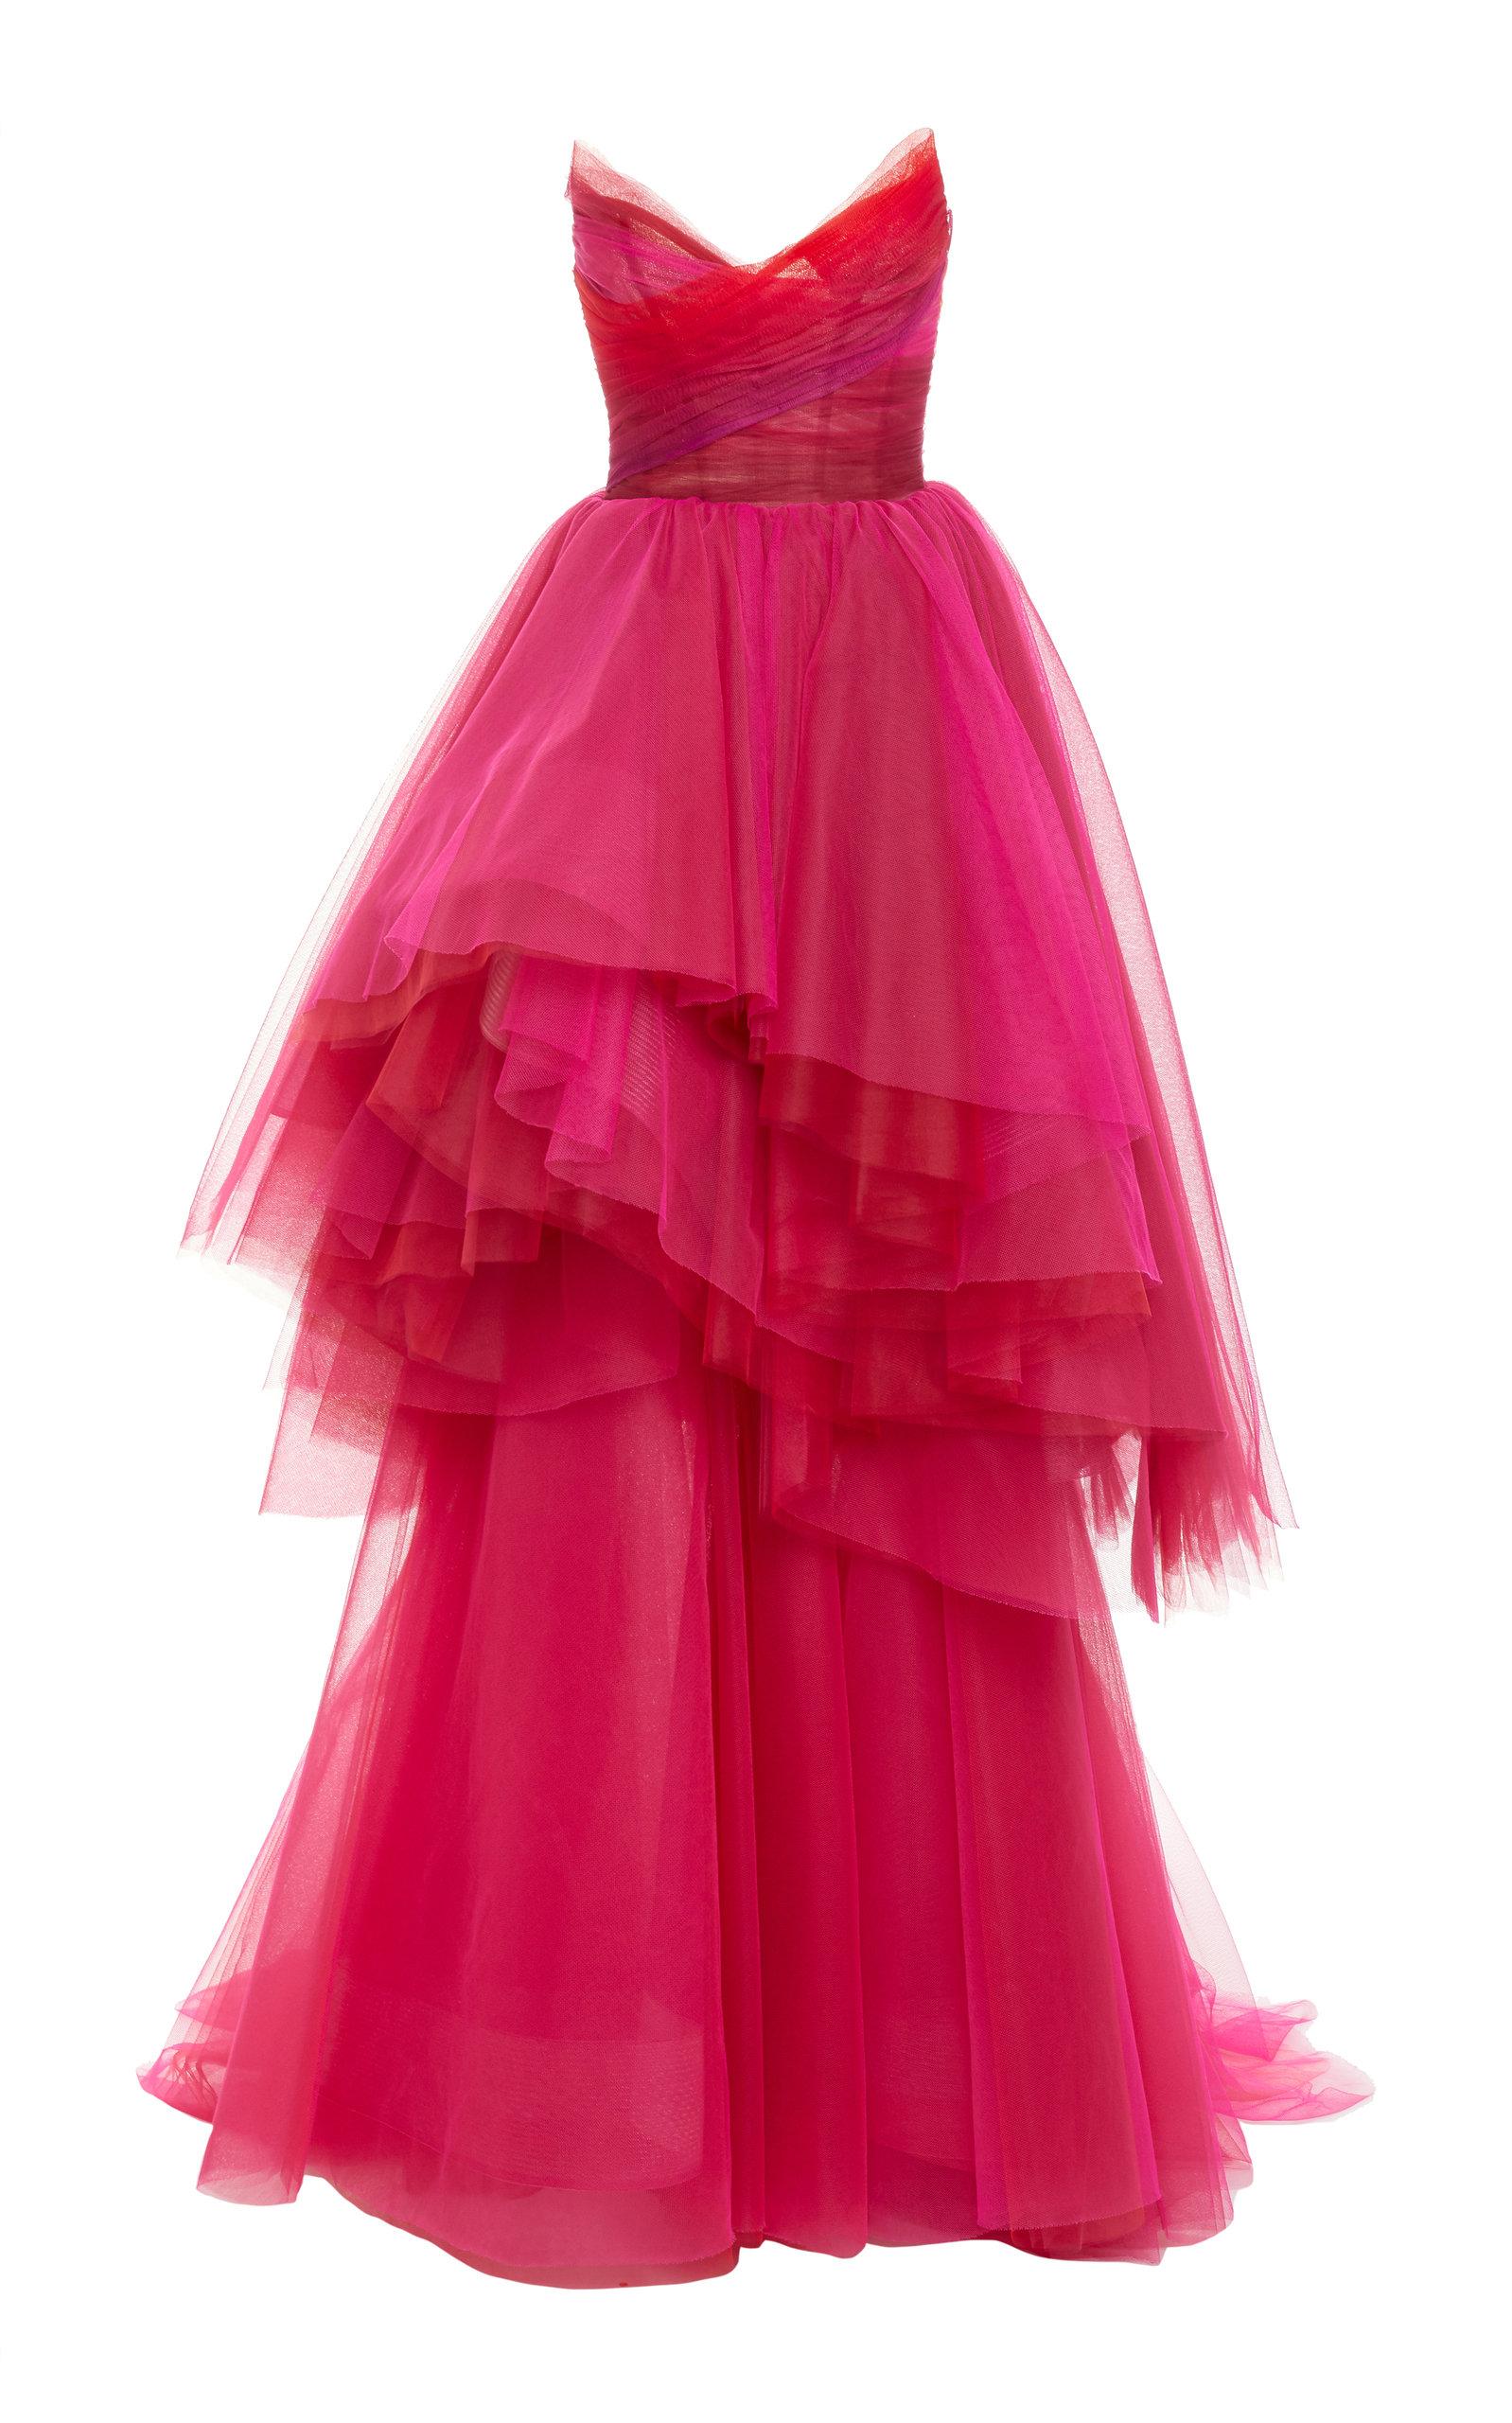 Monique Lhuillier Strapless Asymmetric Tulle Gown in Pink - Lyst